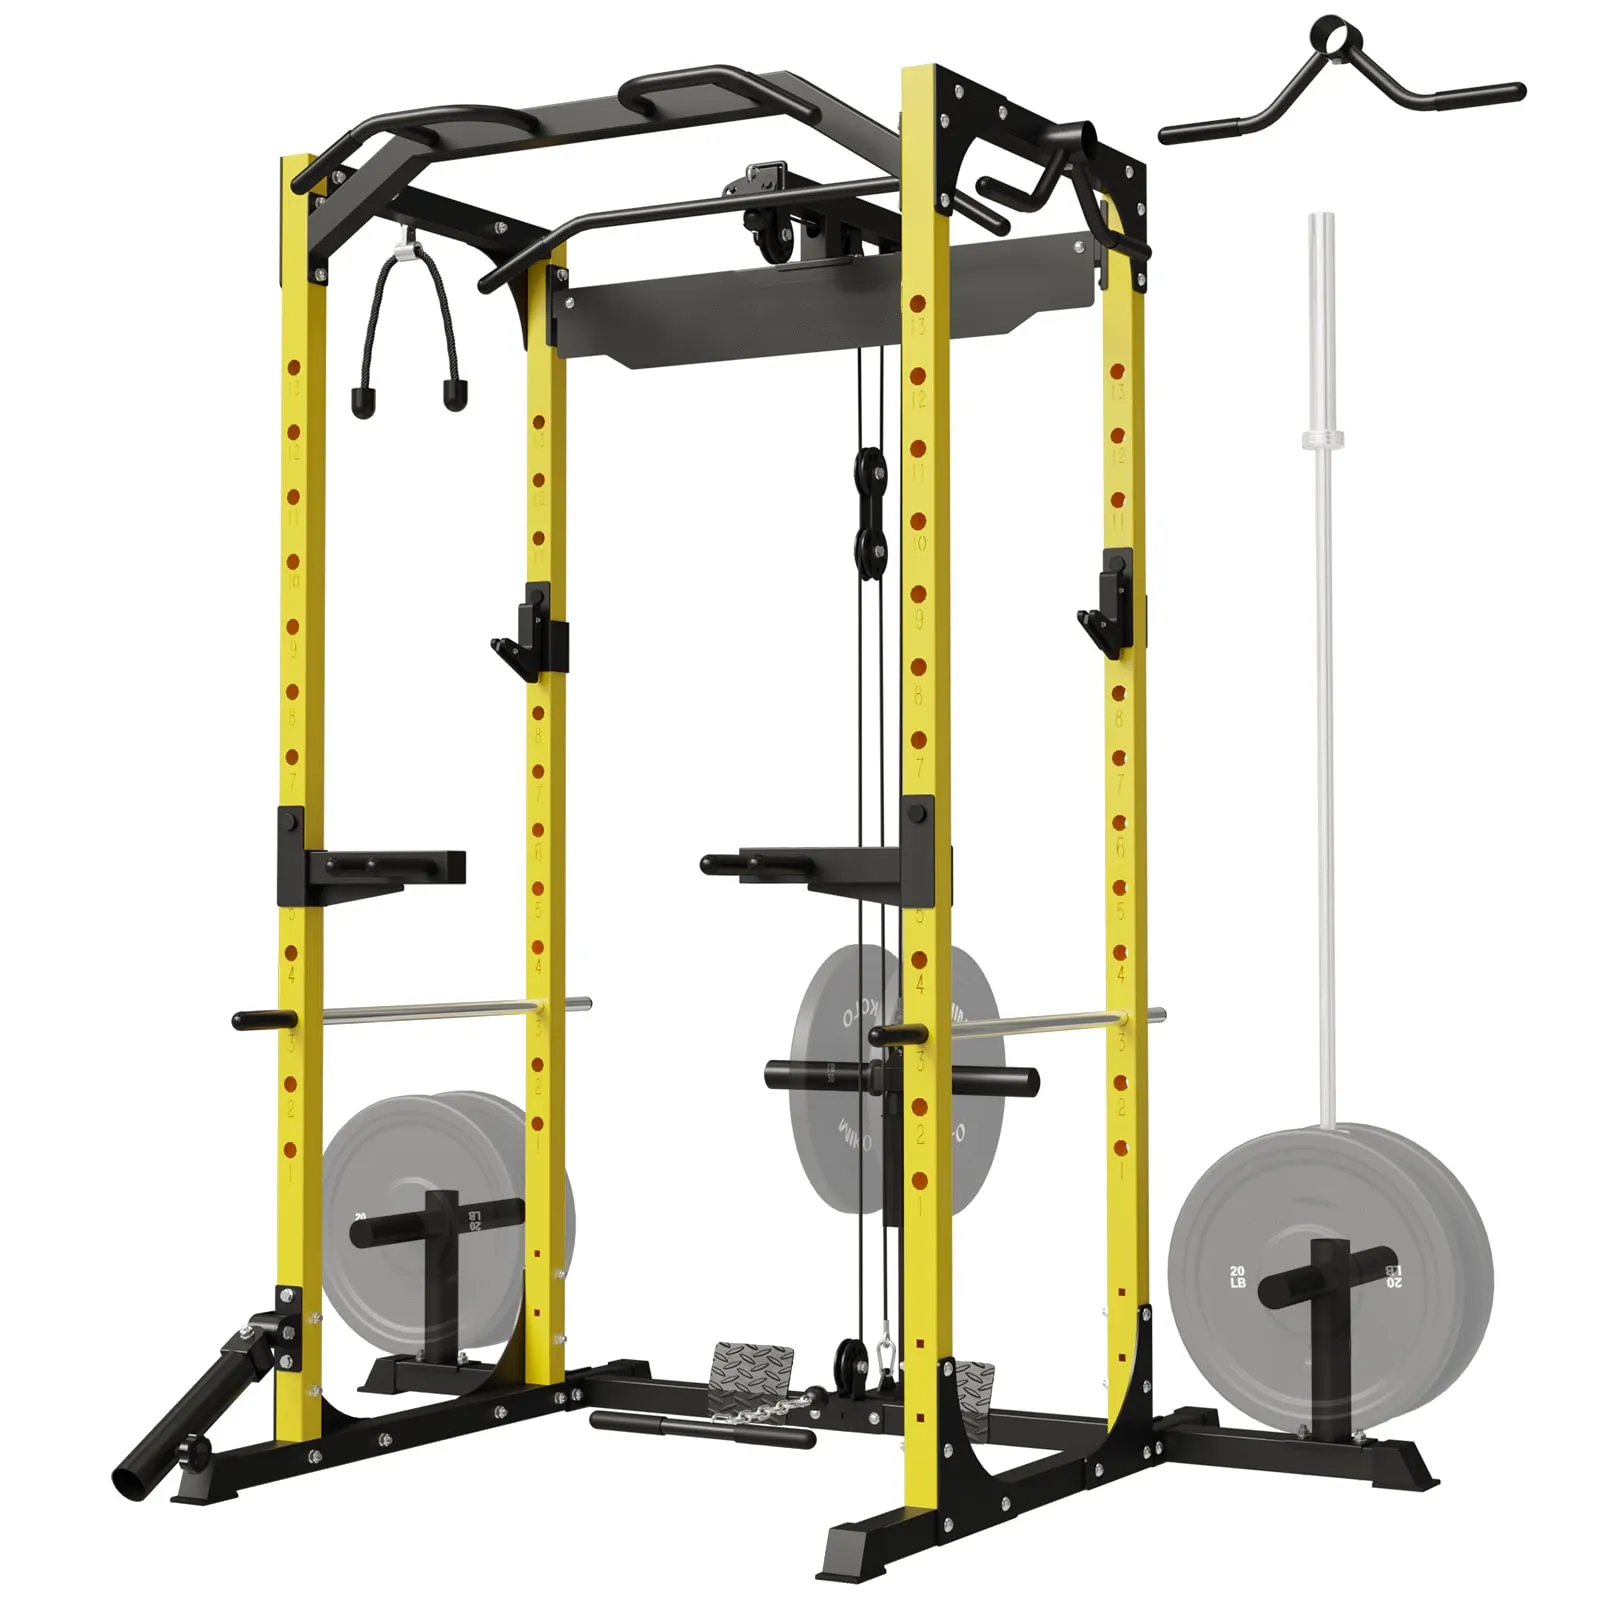 Factory sale of home multi functional fitness power rack squat rack with adjustable cable crossover system